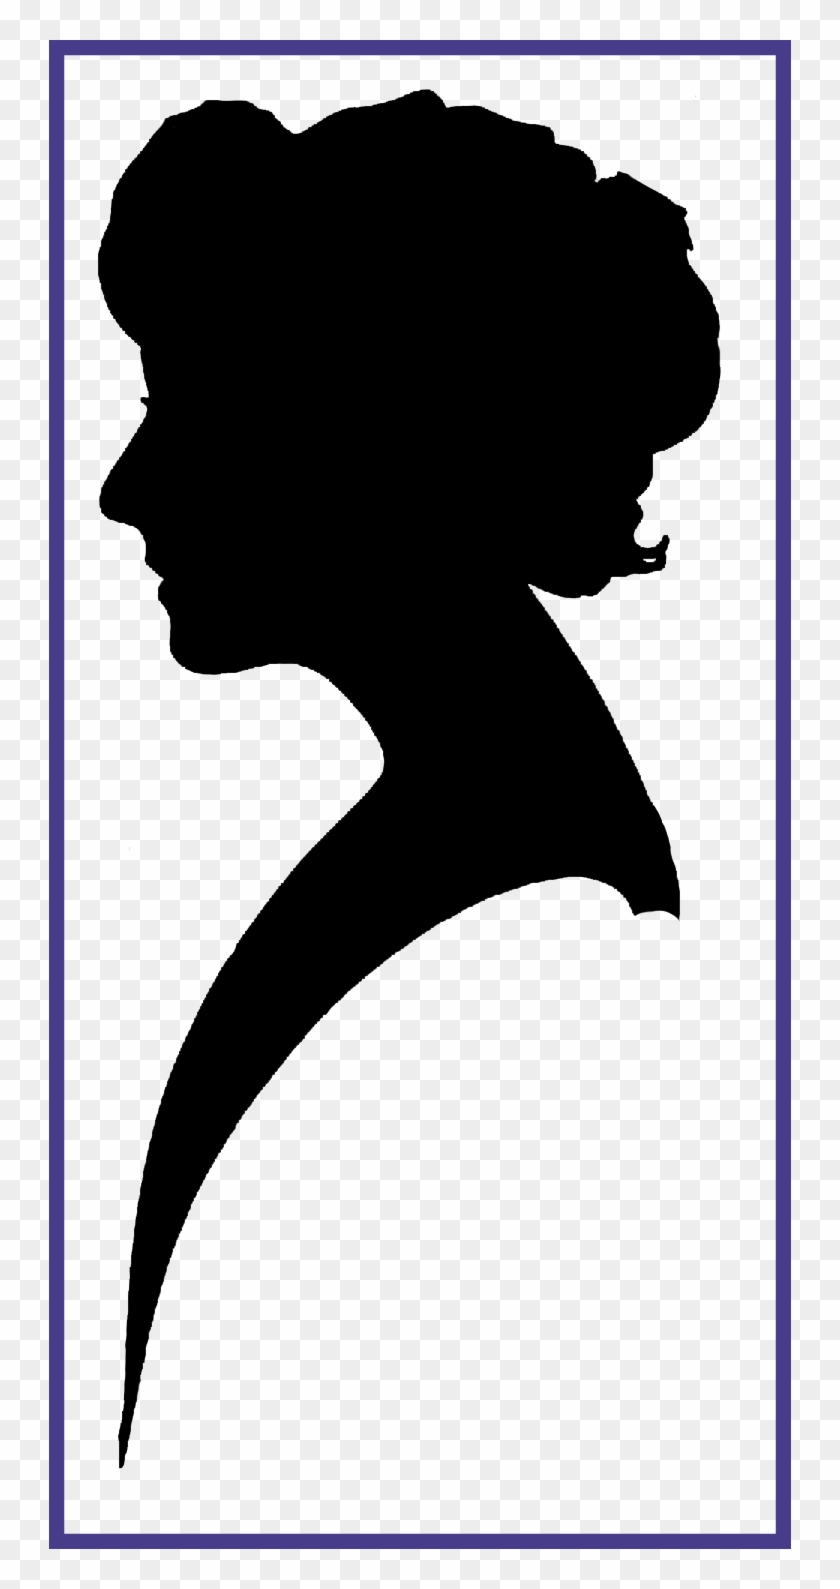 Inspiring Old Fashion Silhouette Clip Art Clipart Vintage - Woman Silhouette Png #725869